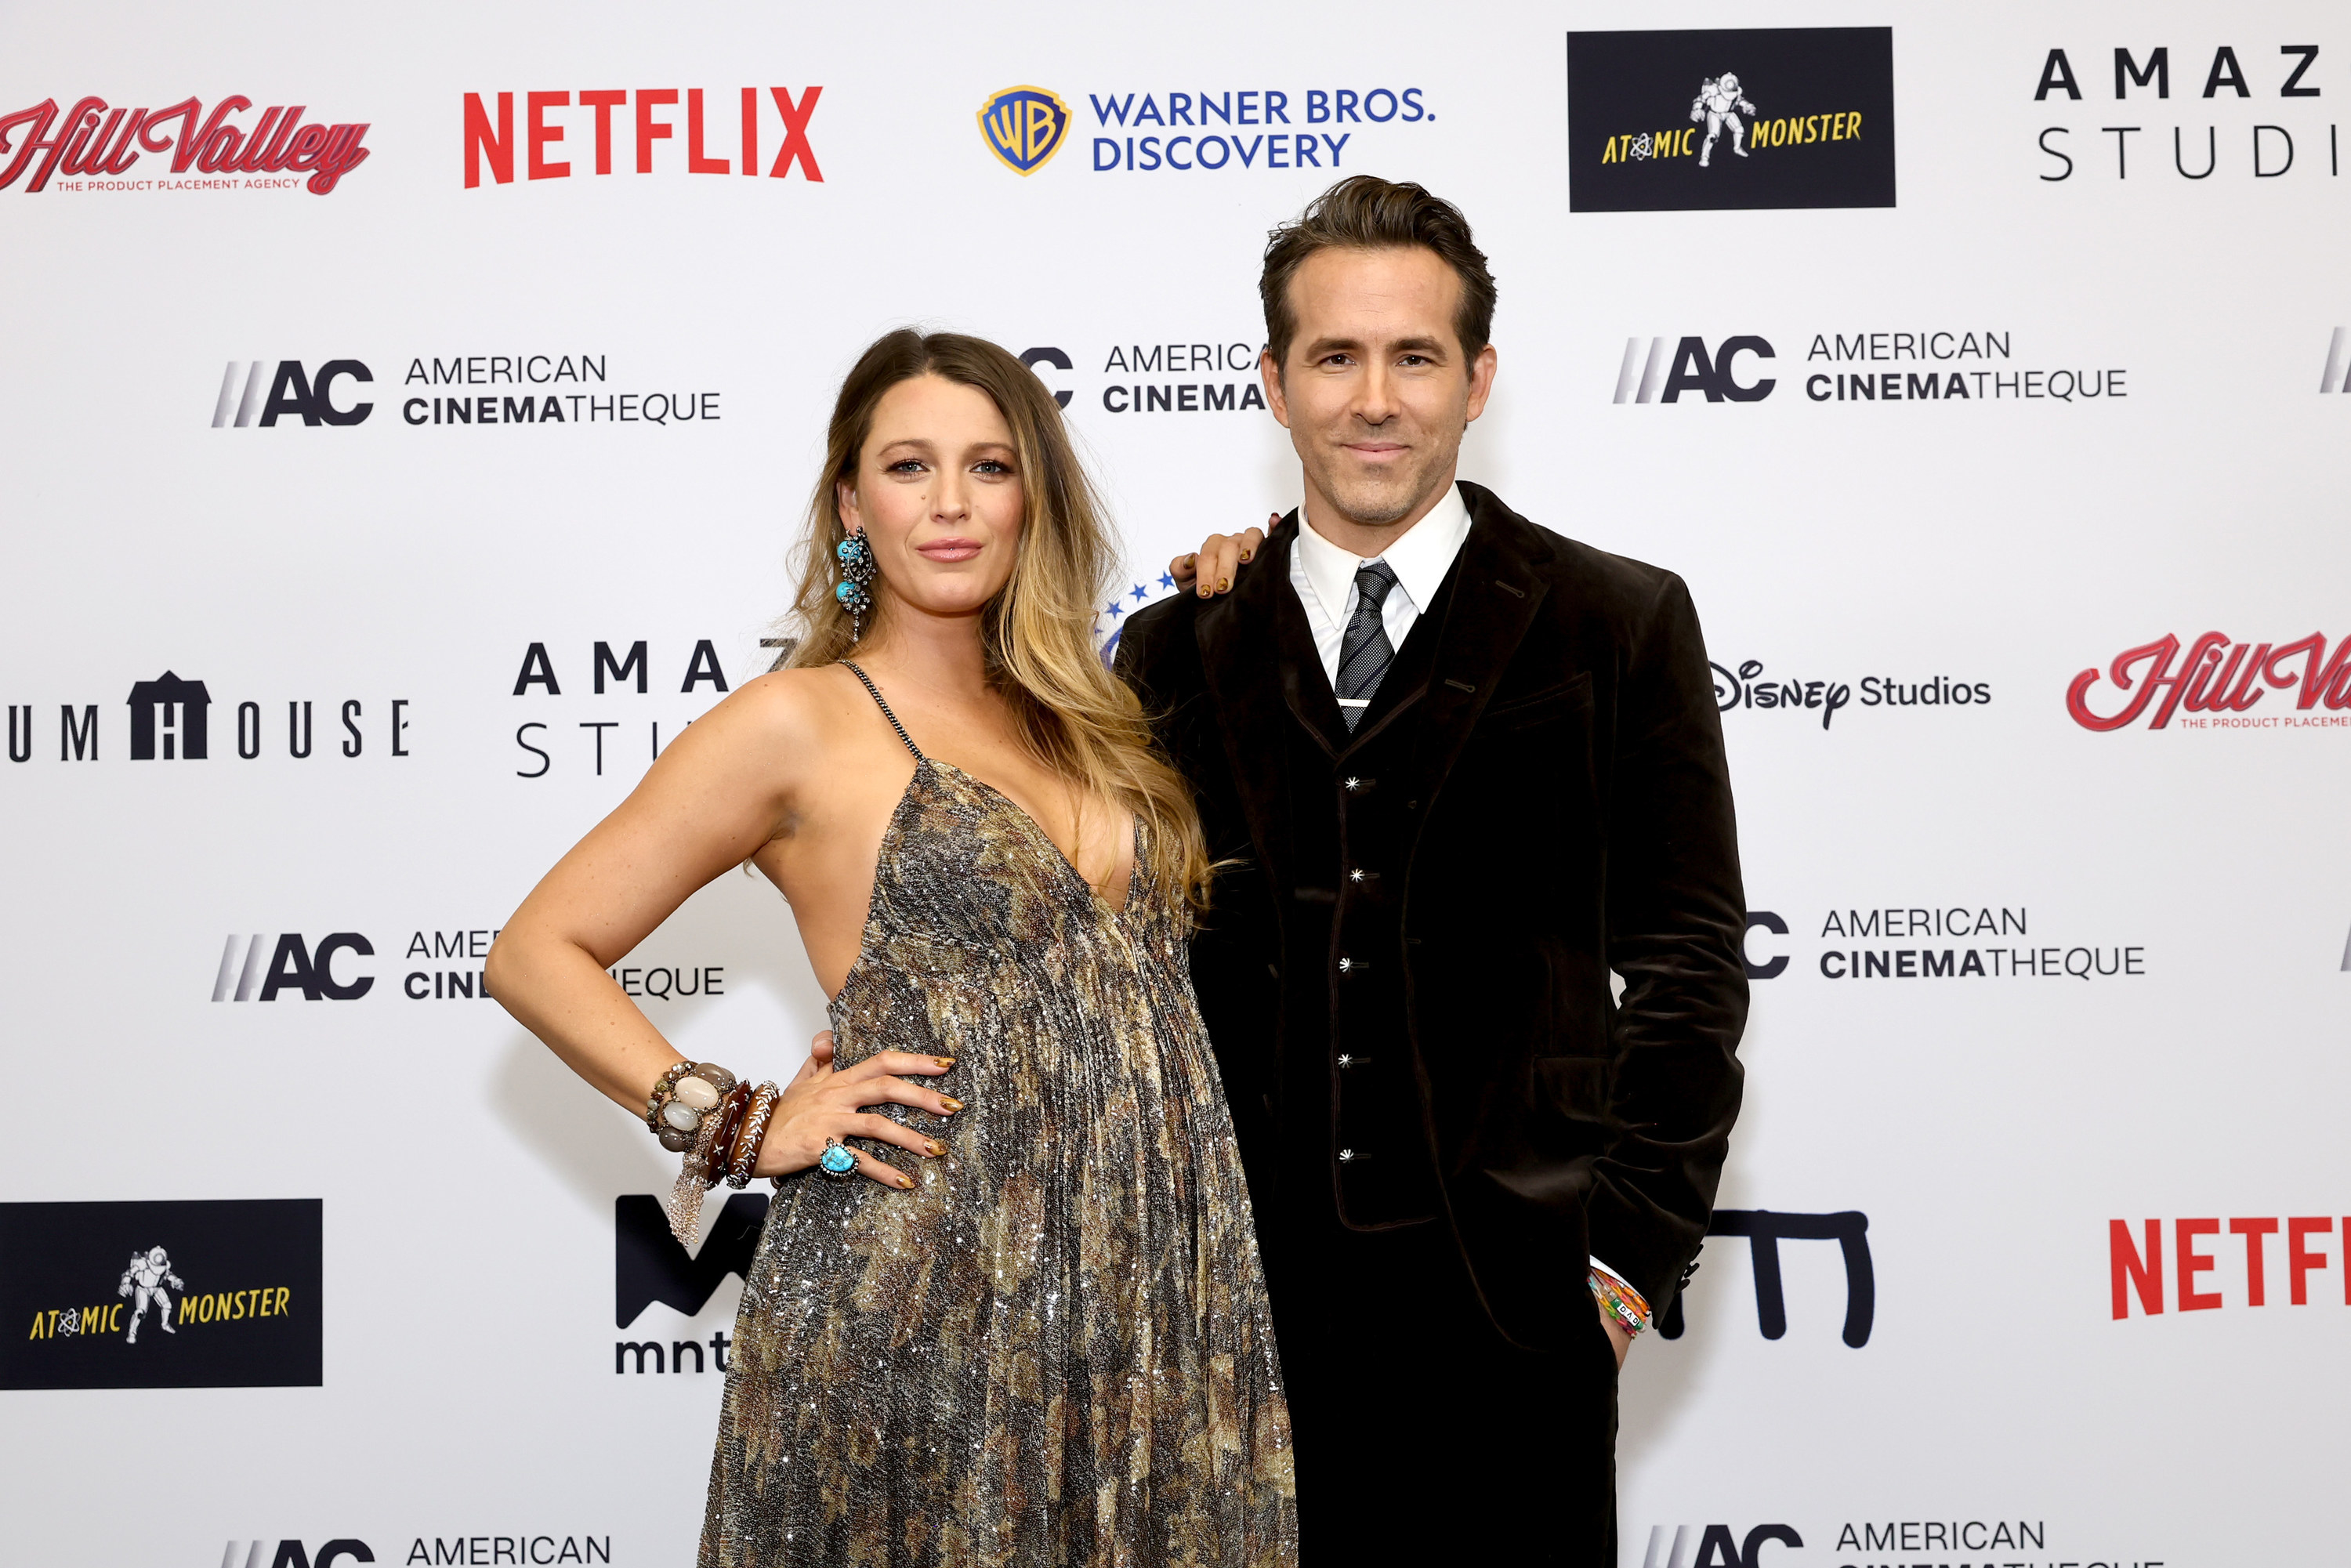 Blake Lively and Ryan Reynolds on the red carpet